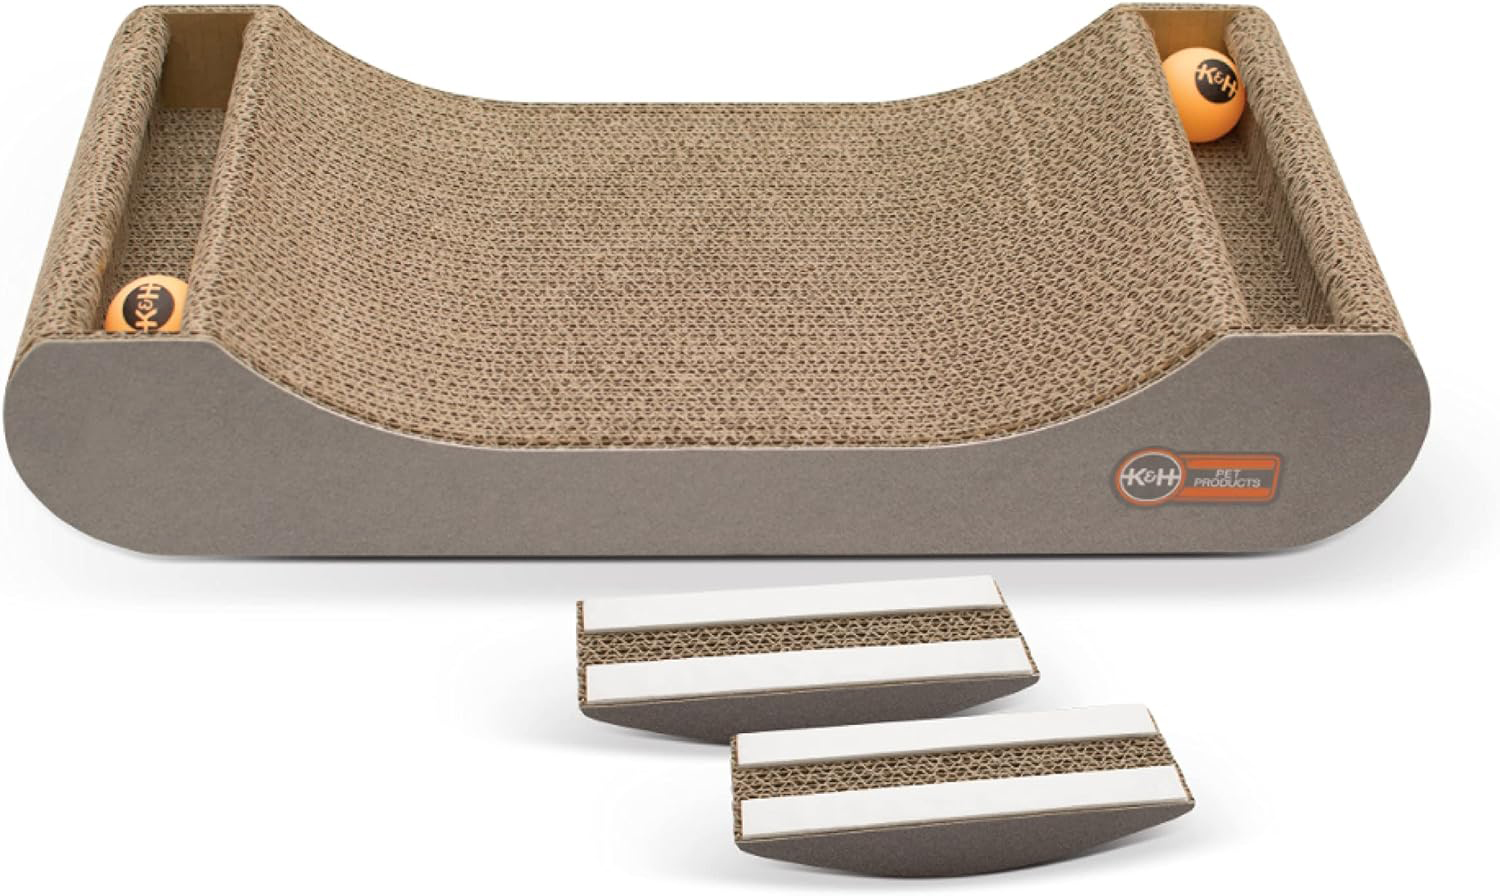 K&H Pet Products Kitty Tippy Cat Scratcher